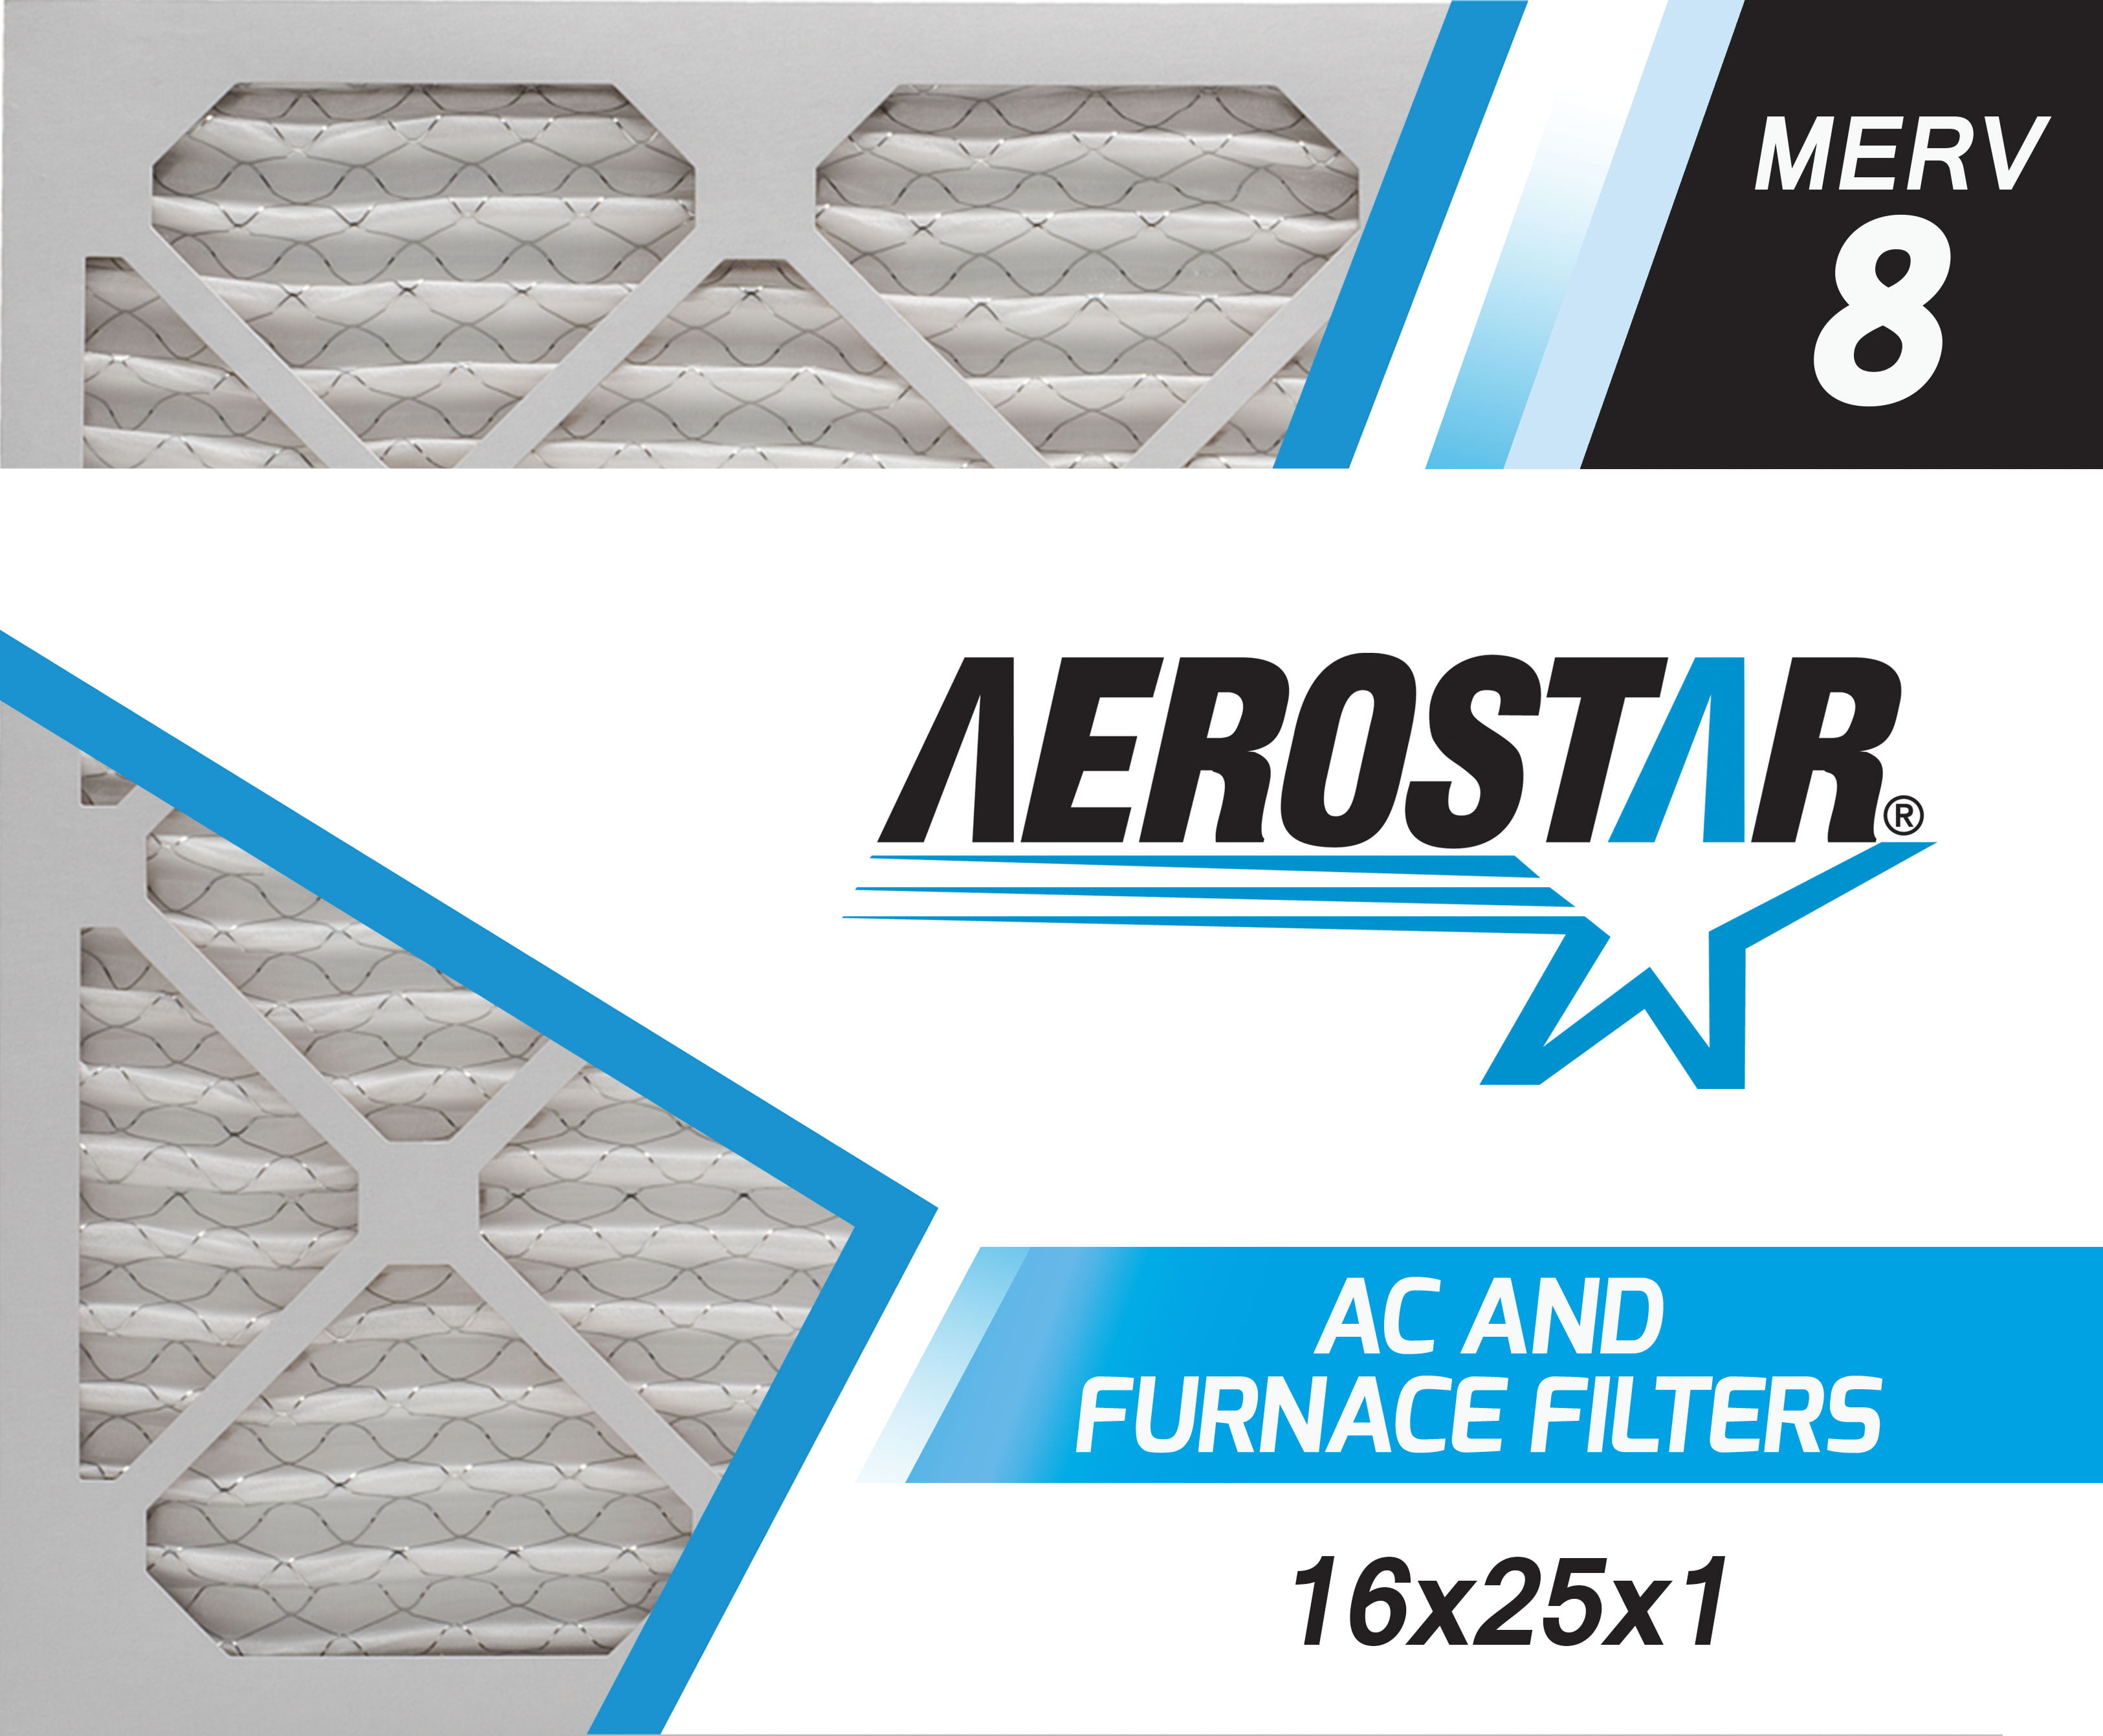 MERV 8 Pack of 6 16x25x1 Aerostar Pleated Air Filter Made in the USA 